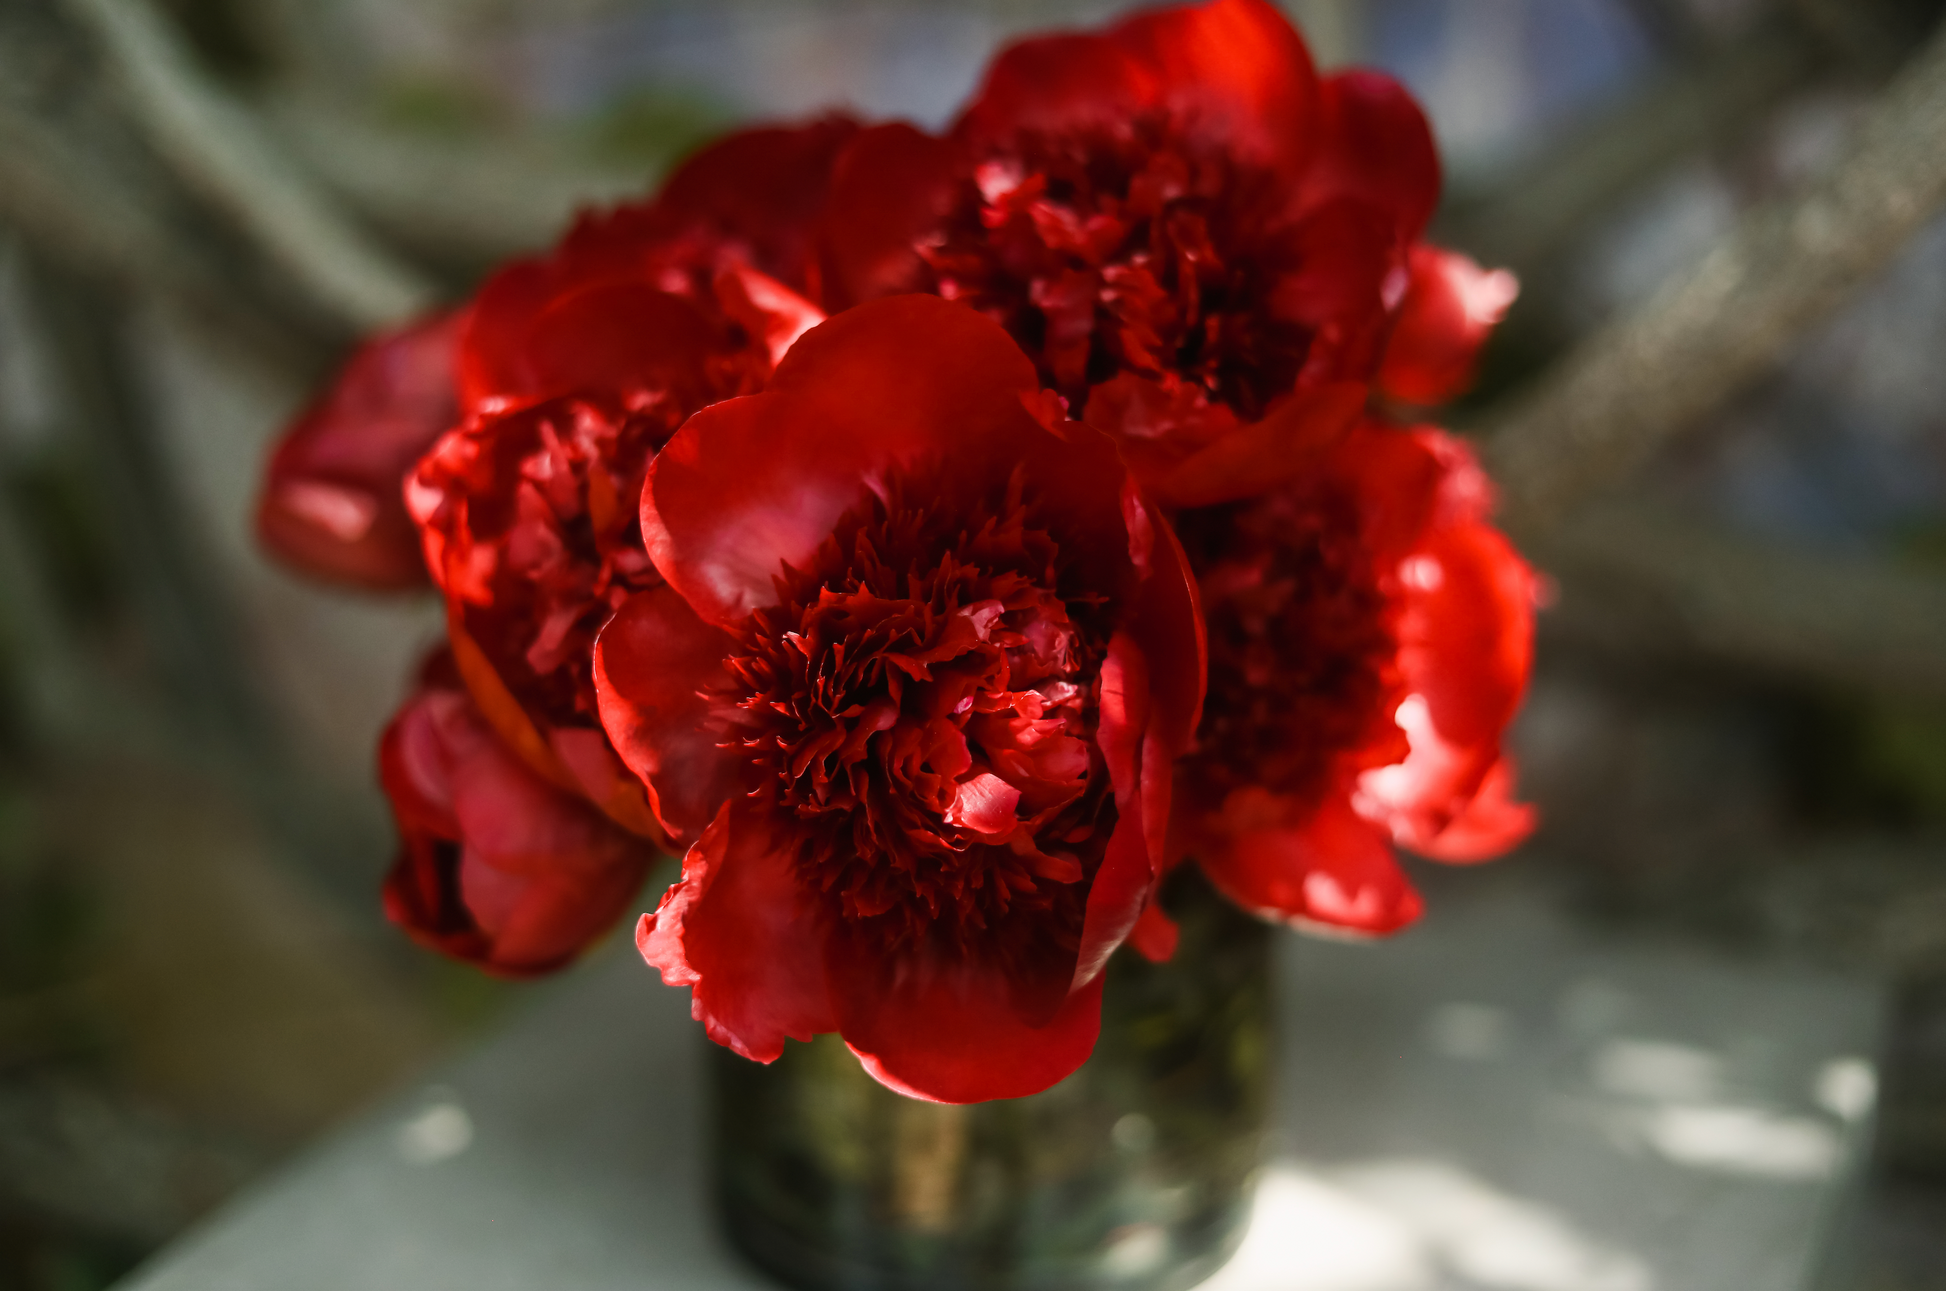 In dappled light, a close up of a Mother's Day flower arrangement featuring richly colored burgundy peonies, full and open.